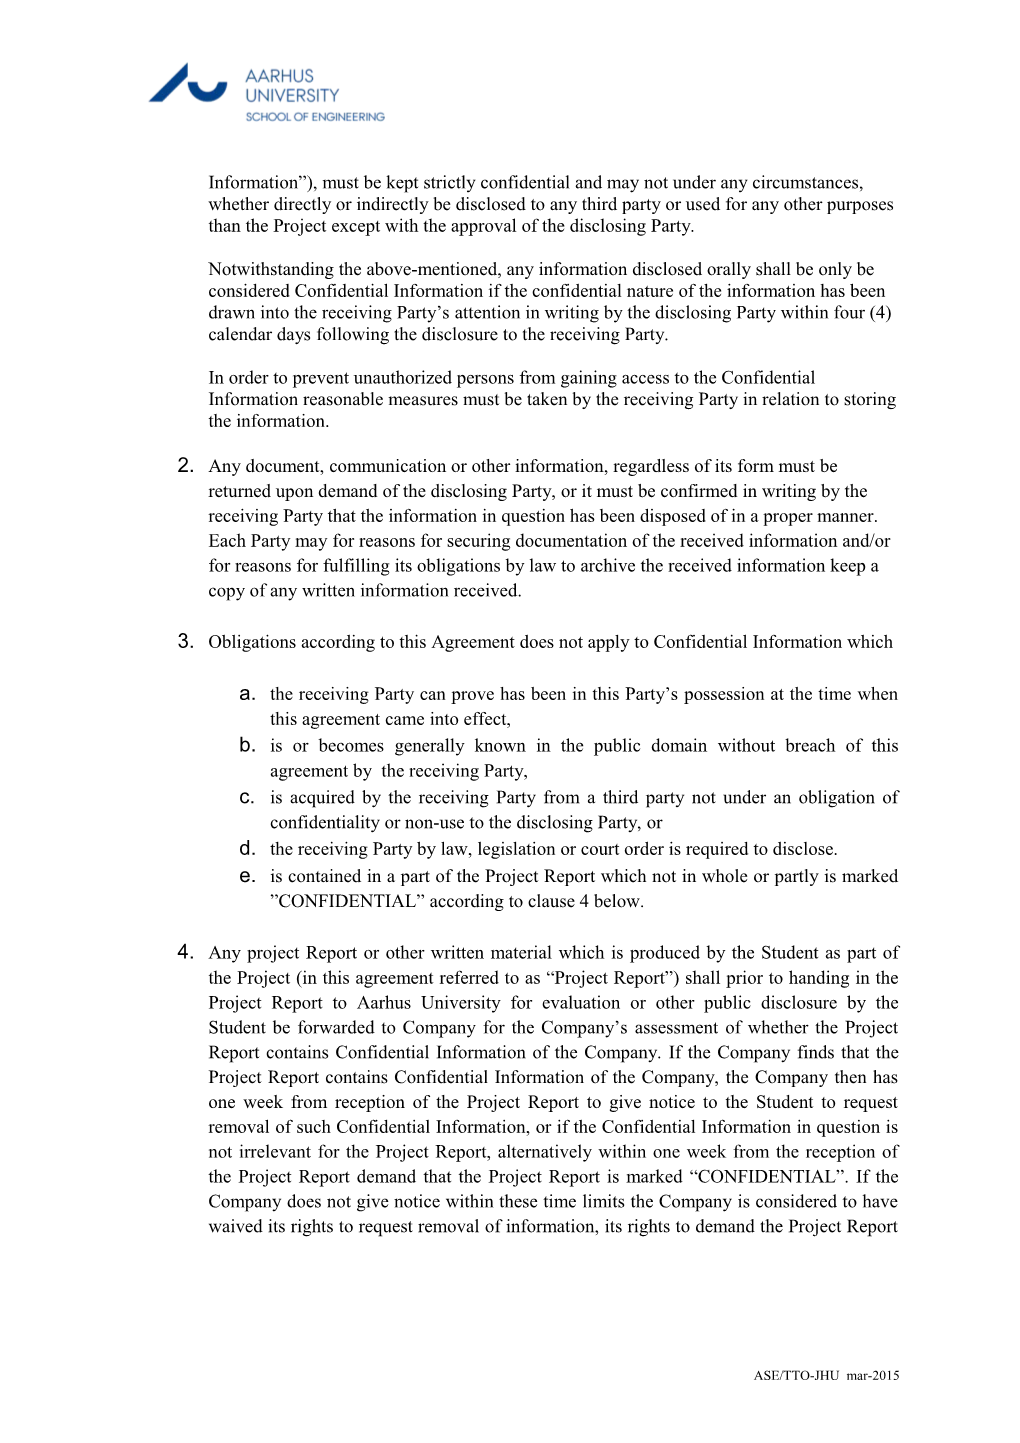 Confidentiality Agreement s7